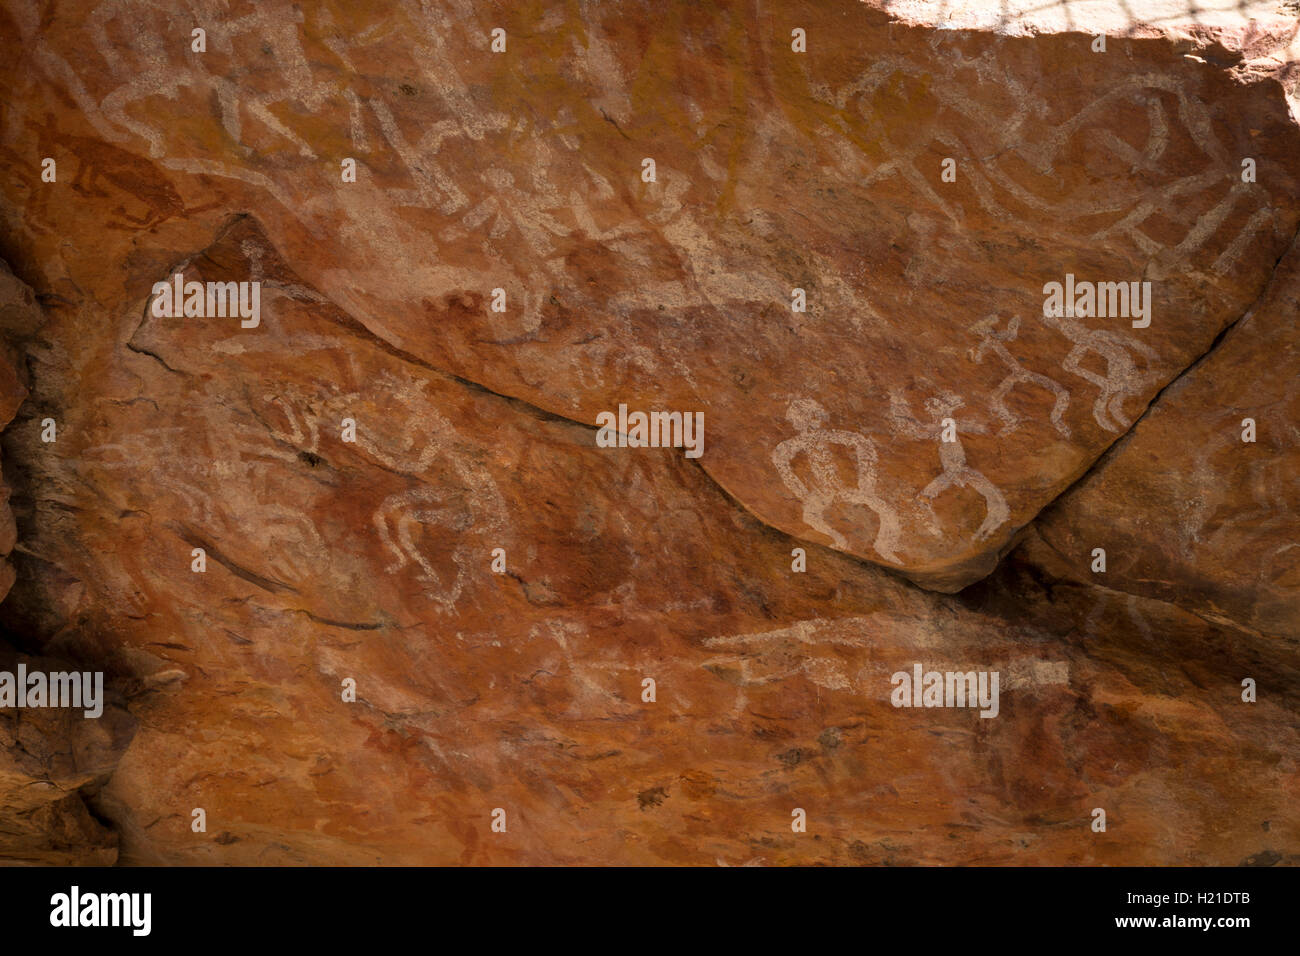 Mt Grenfell Aboriginal Rock Painting Site near Cobar New South Wales Australia Stock Photo